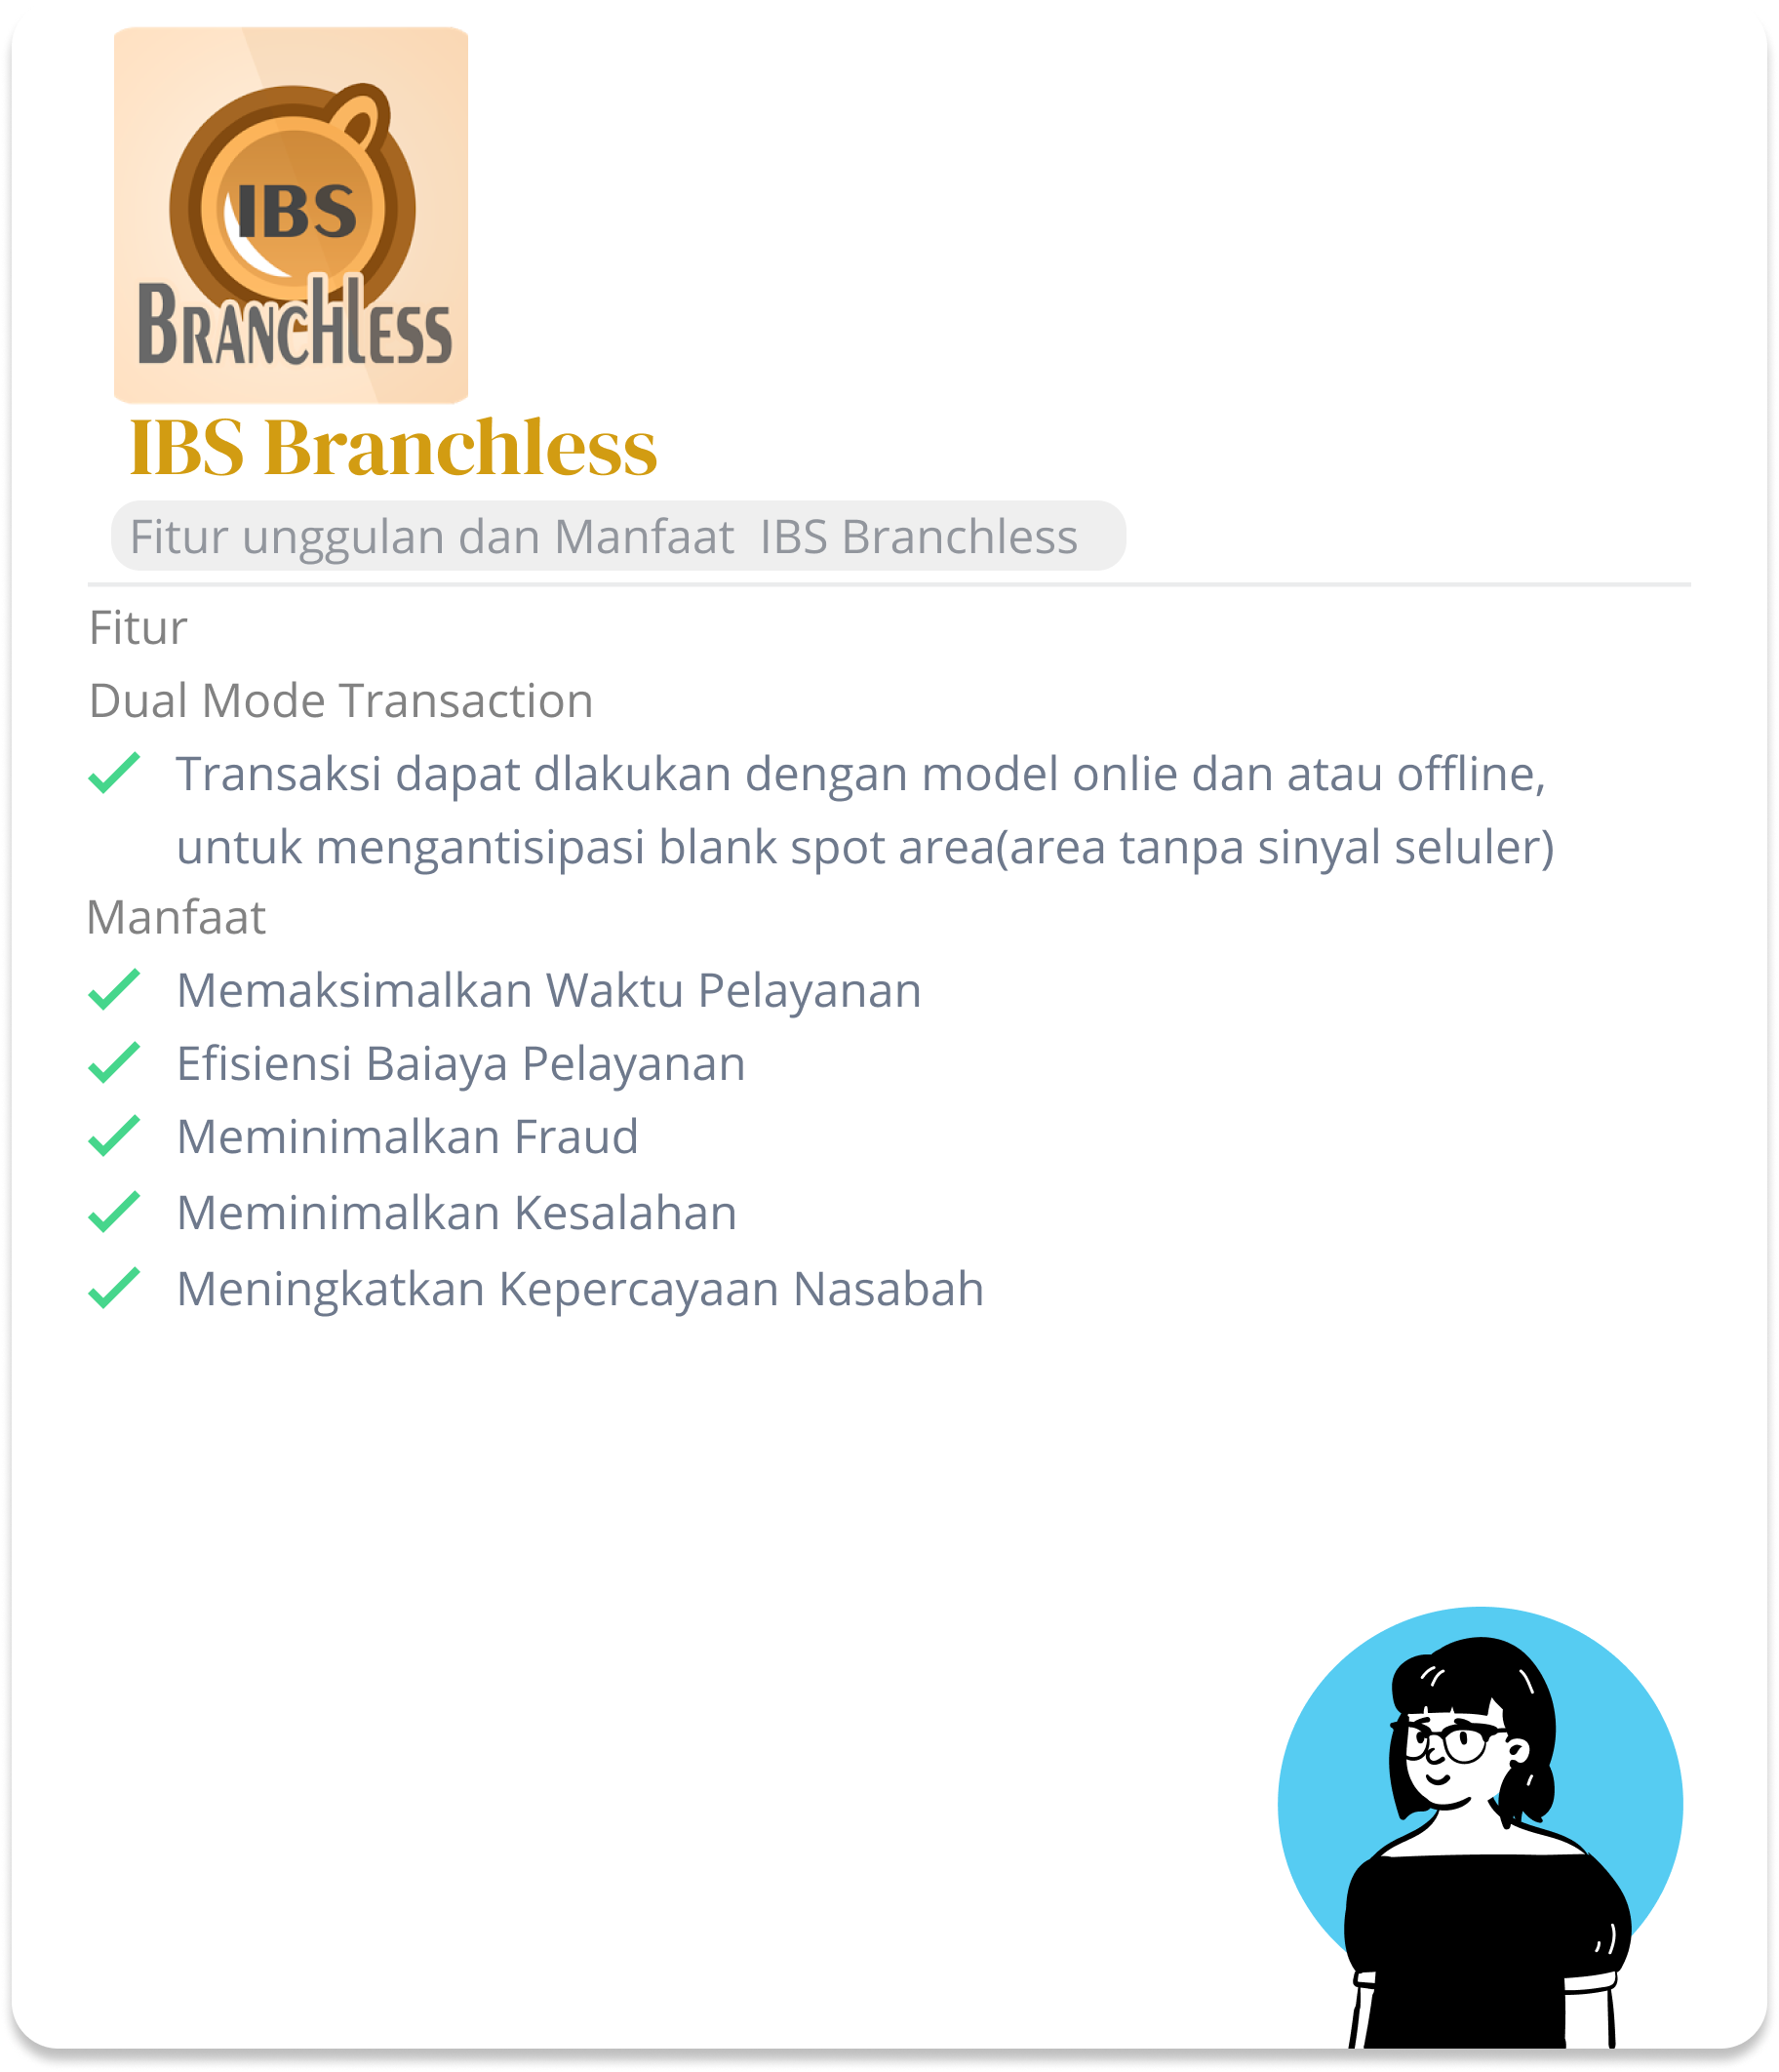 IBS Branchless